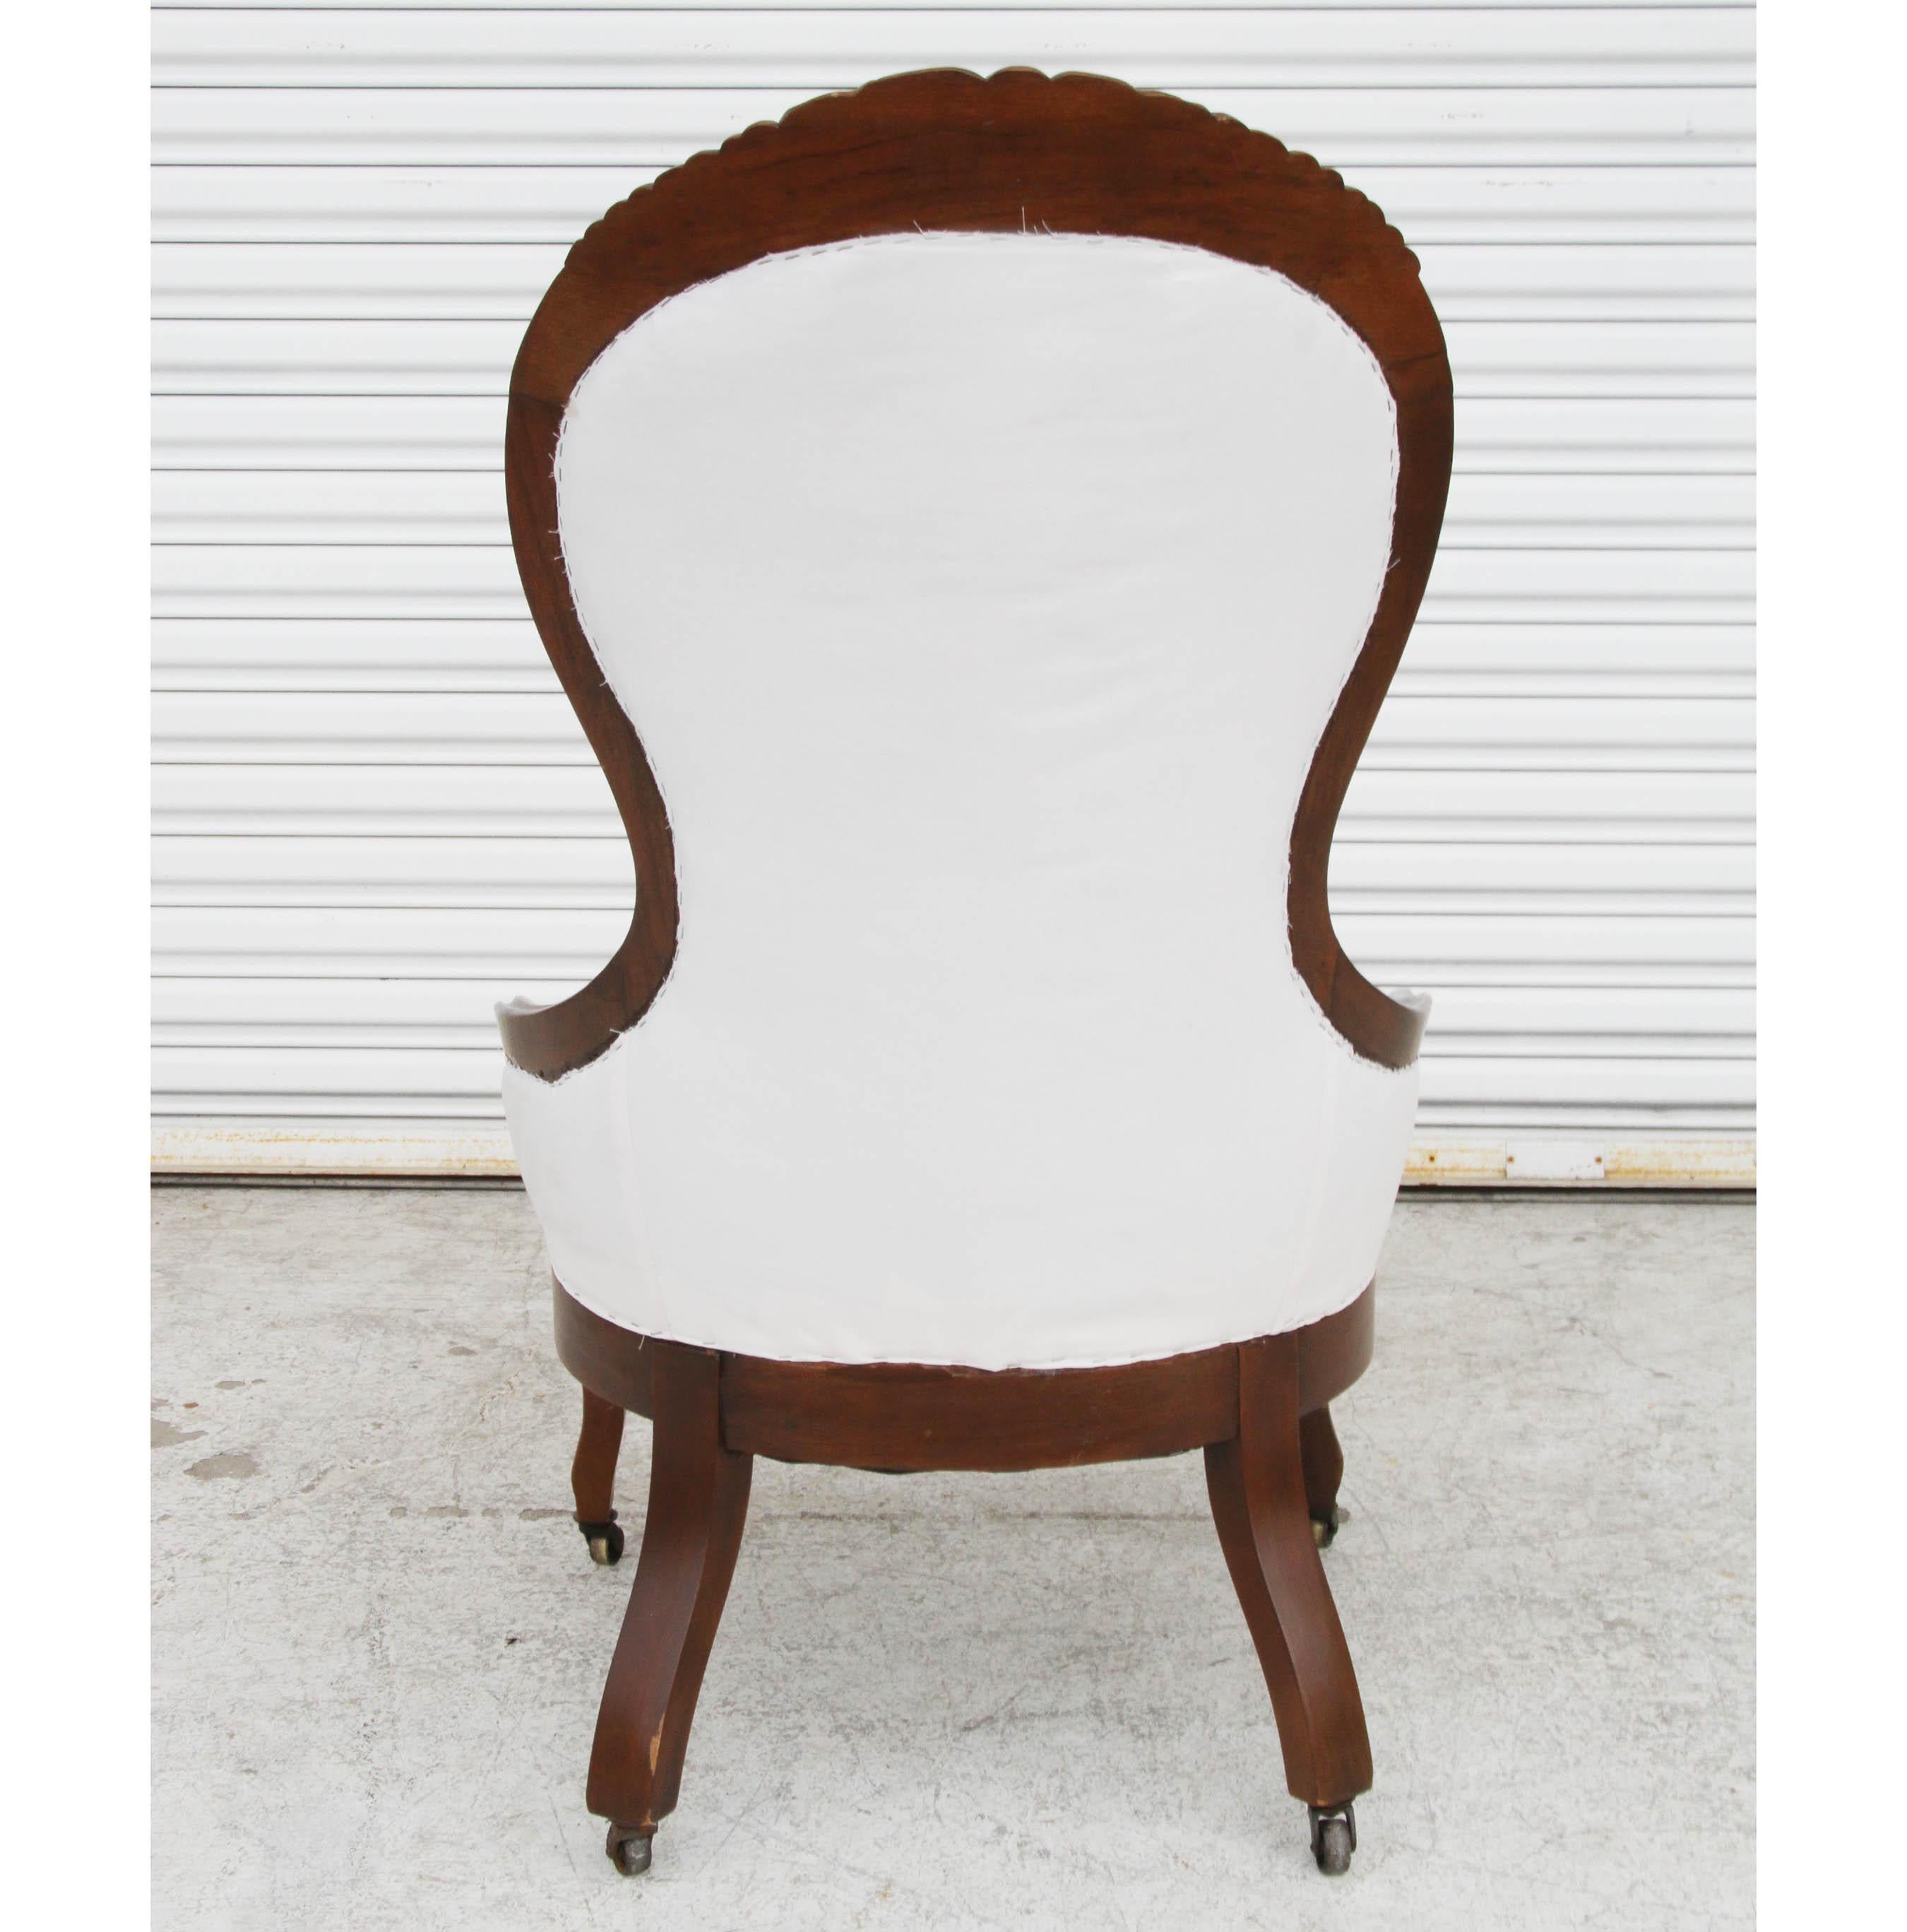 19th Century Victorian Style Spoon Back Parlor Lounge Chair For Sale